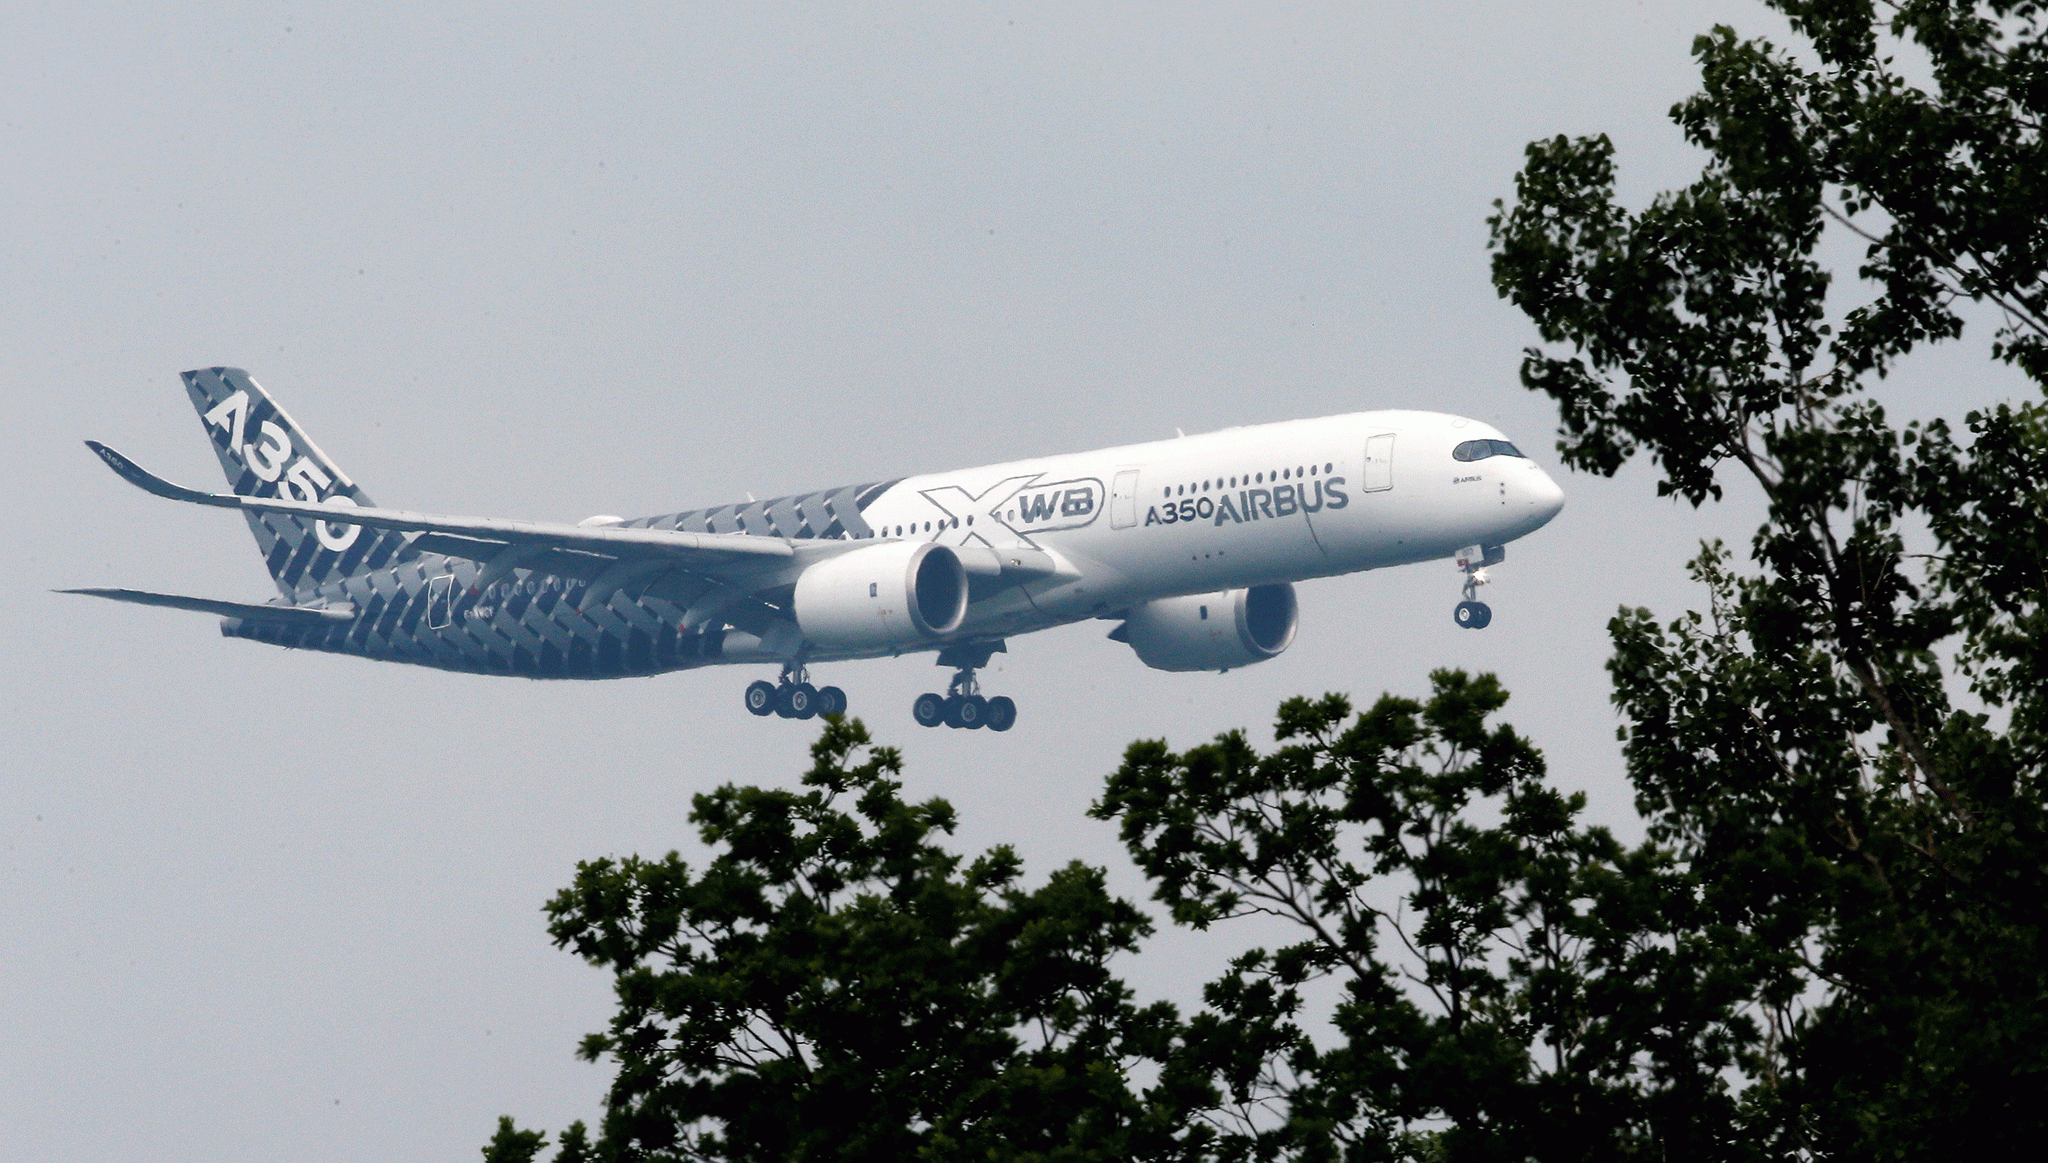 Airbus A350 plane pictured at the Berlin Airshow in June - the company is accused of hiring third party consultants who bribed officials